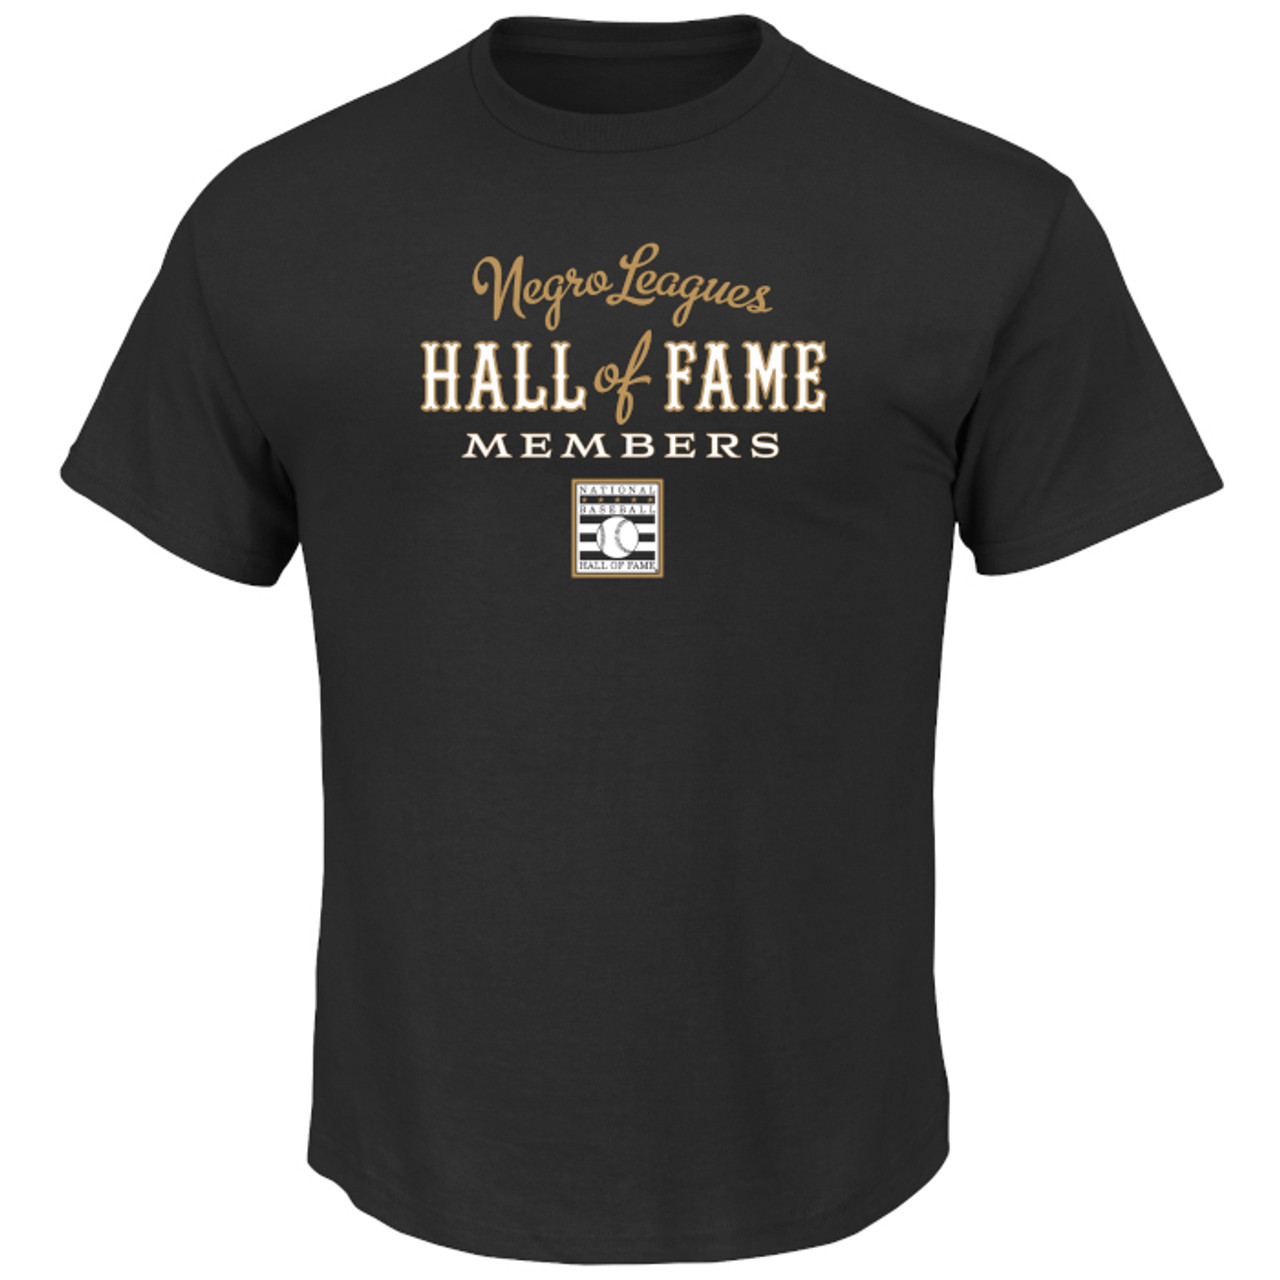 Men's Teambrown Negro Leagues Hall of Famer Roster T-Shirt (2022)